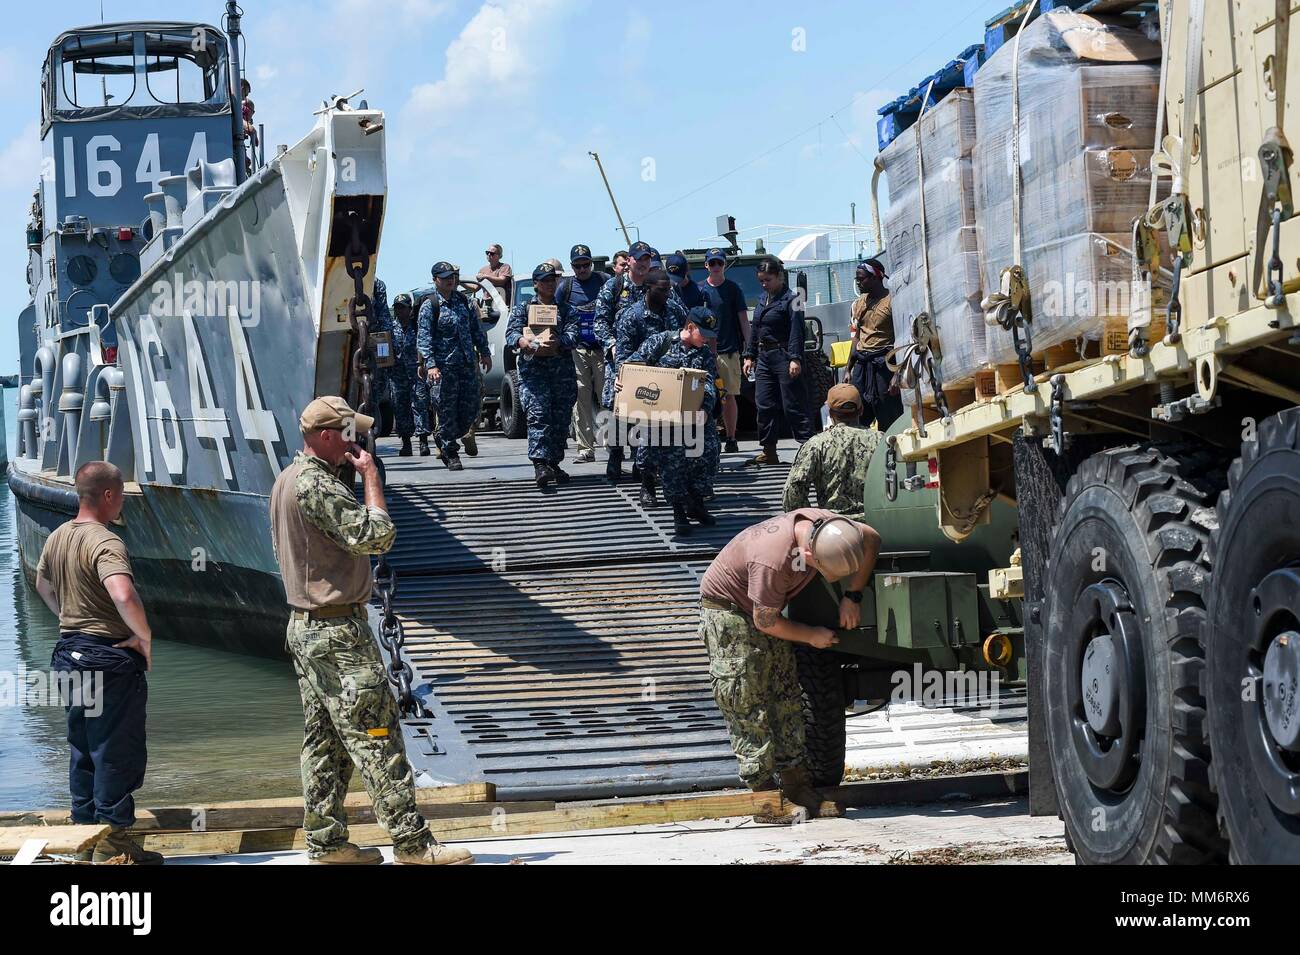 KEY WEST, Fla. (Sept. 13, 2017) Volunteer Sailors from the amphibious assault ship USS Iwo Jima (LHD 7) disembark Landing Craft Unit 1644, attached to Assault Craft Unit (ACU) 2, which is loaded with during humanitarian assistance efforts following Hurricane Irma’s landfall in Key West, Florida. The Department of Defense is supporting Federal Emergency Management Agency, the lead agency, in helping those affixed by Hurricane Irma to minimize suffering and as one component of the overall whole-of-government response efforts.  (U.S. Navy photo by Mass Communication Specialist Seaman Michael Lehm Stock Photo